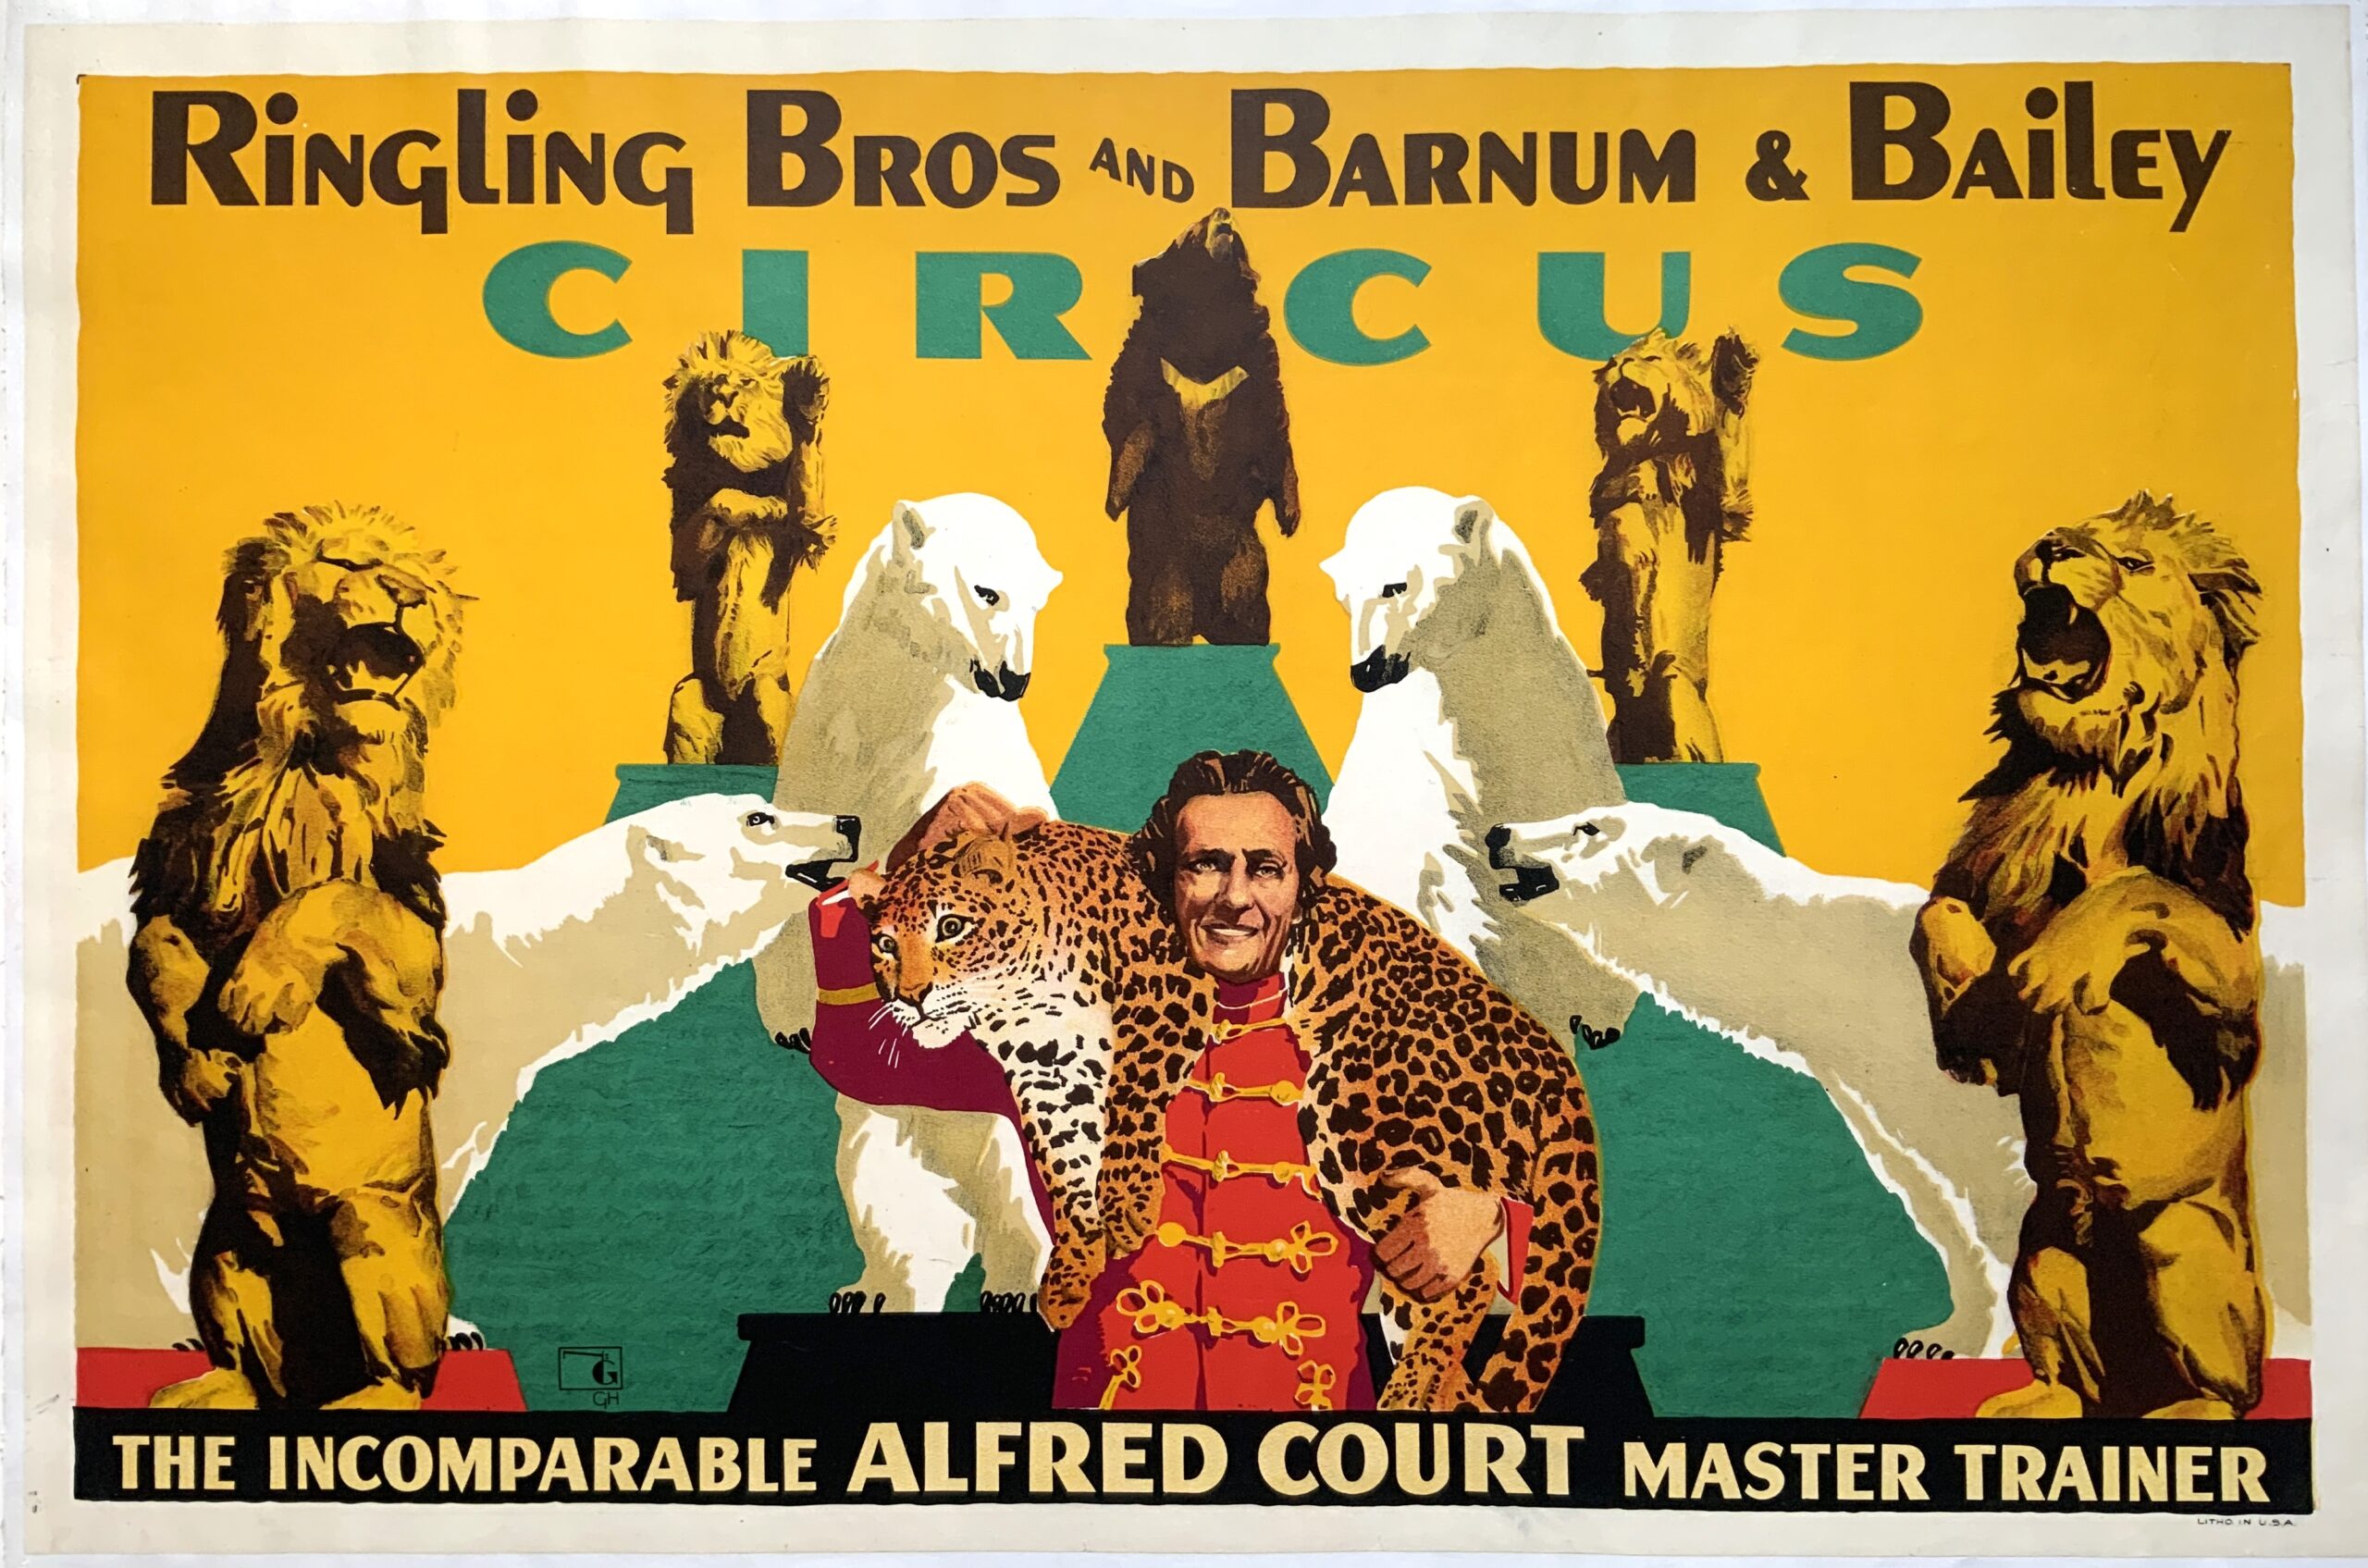 DK213 RINGLING BROS AND BARNUM & BAILEY - ALFRED COURT MASTER TRAINER